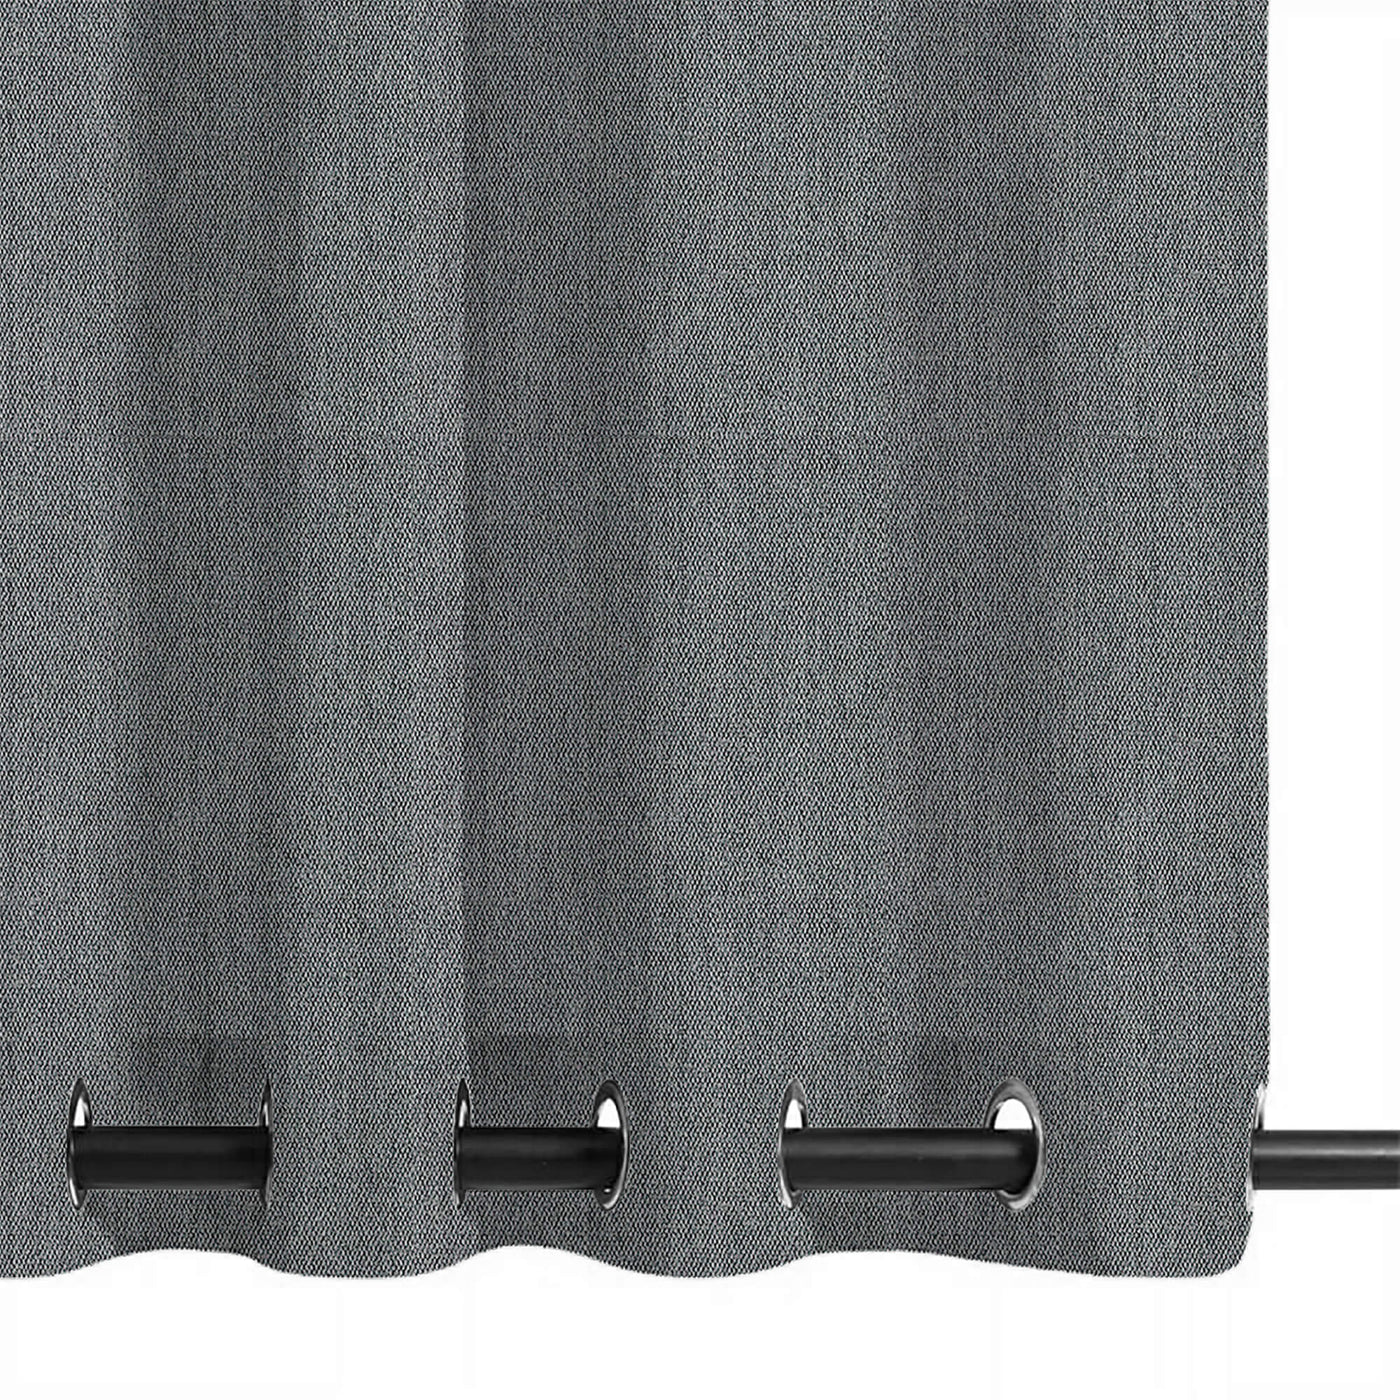 PENGI Outdoor Curtains Waterproof- Mix Charcoal Gray